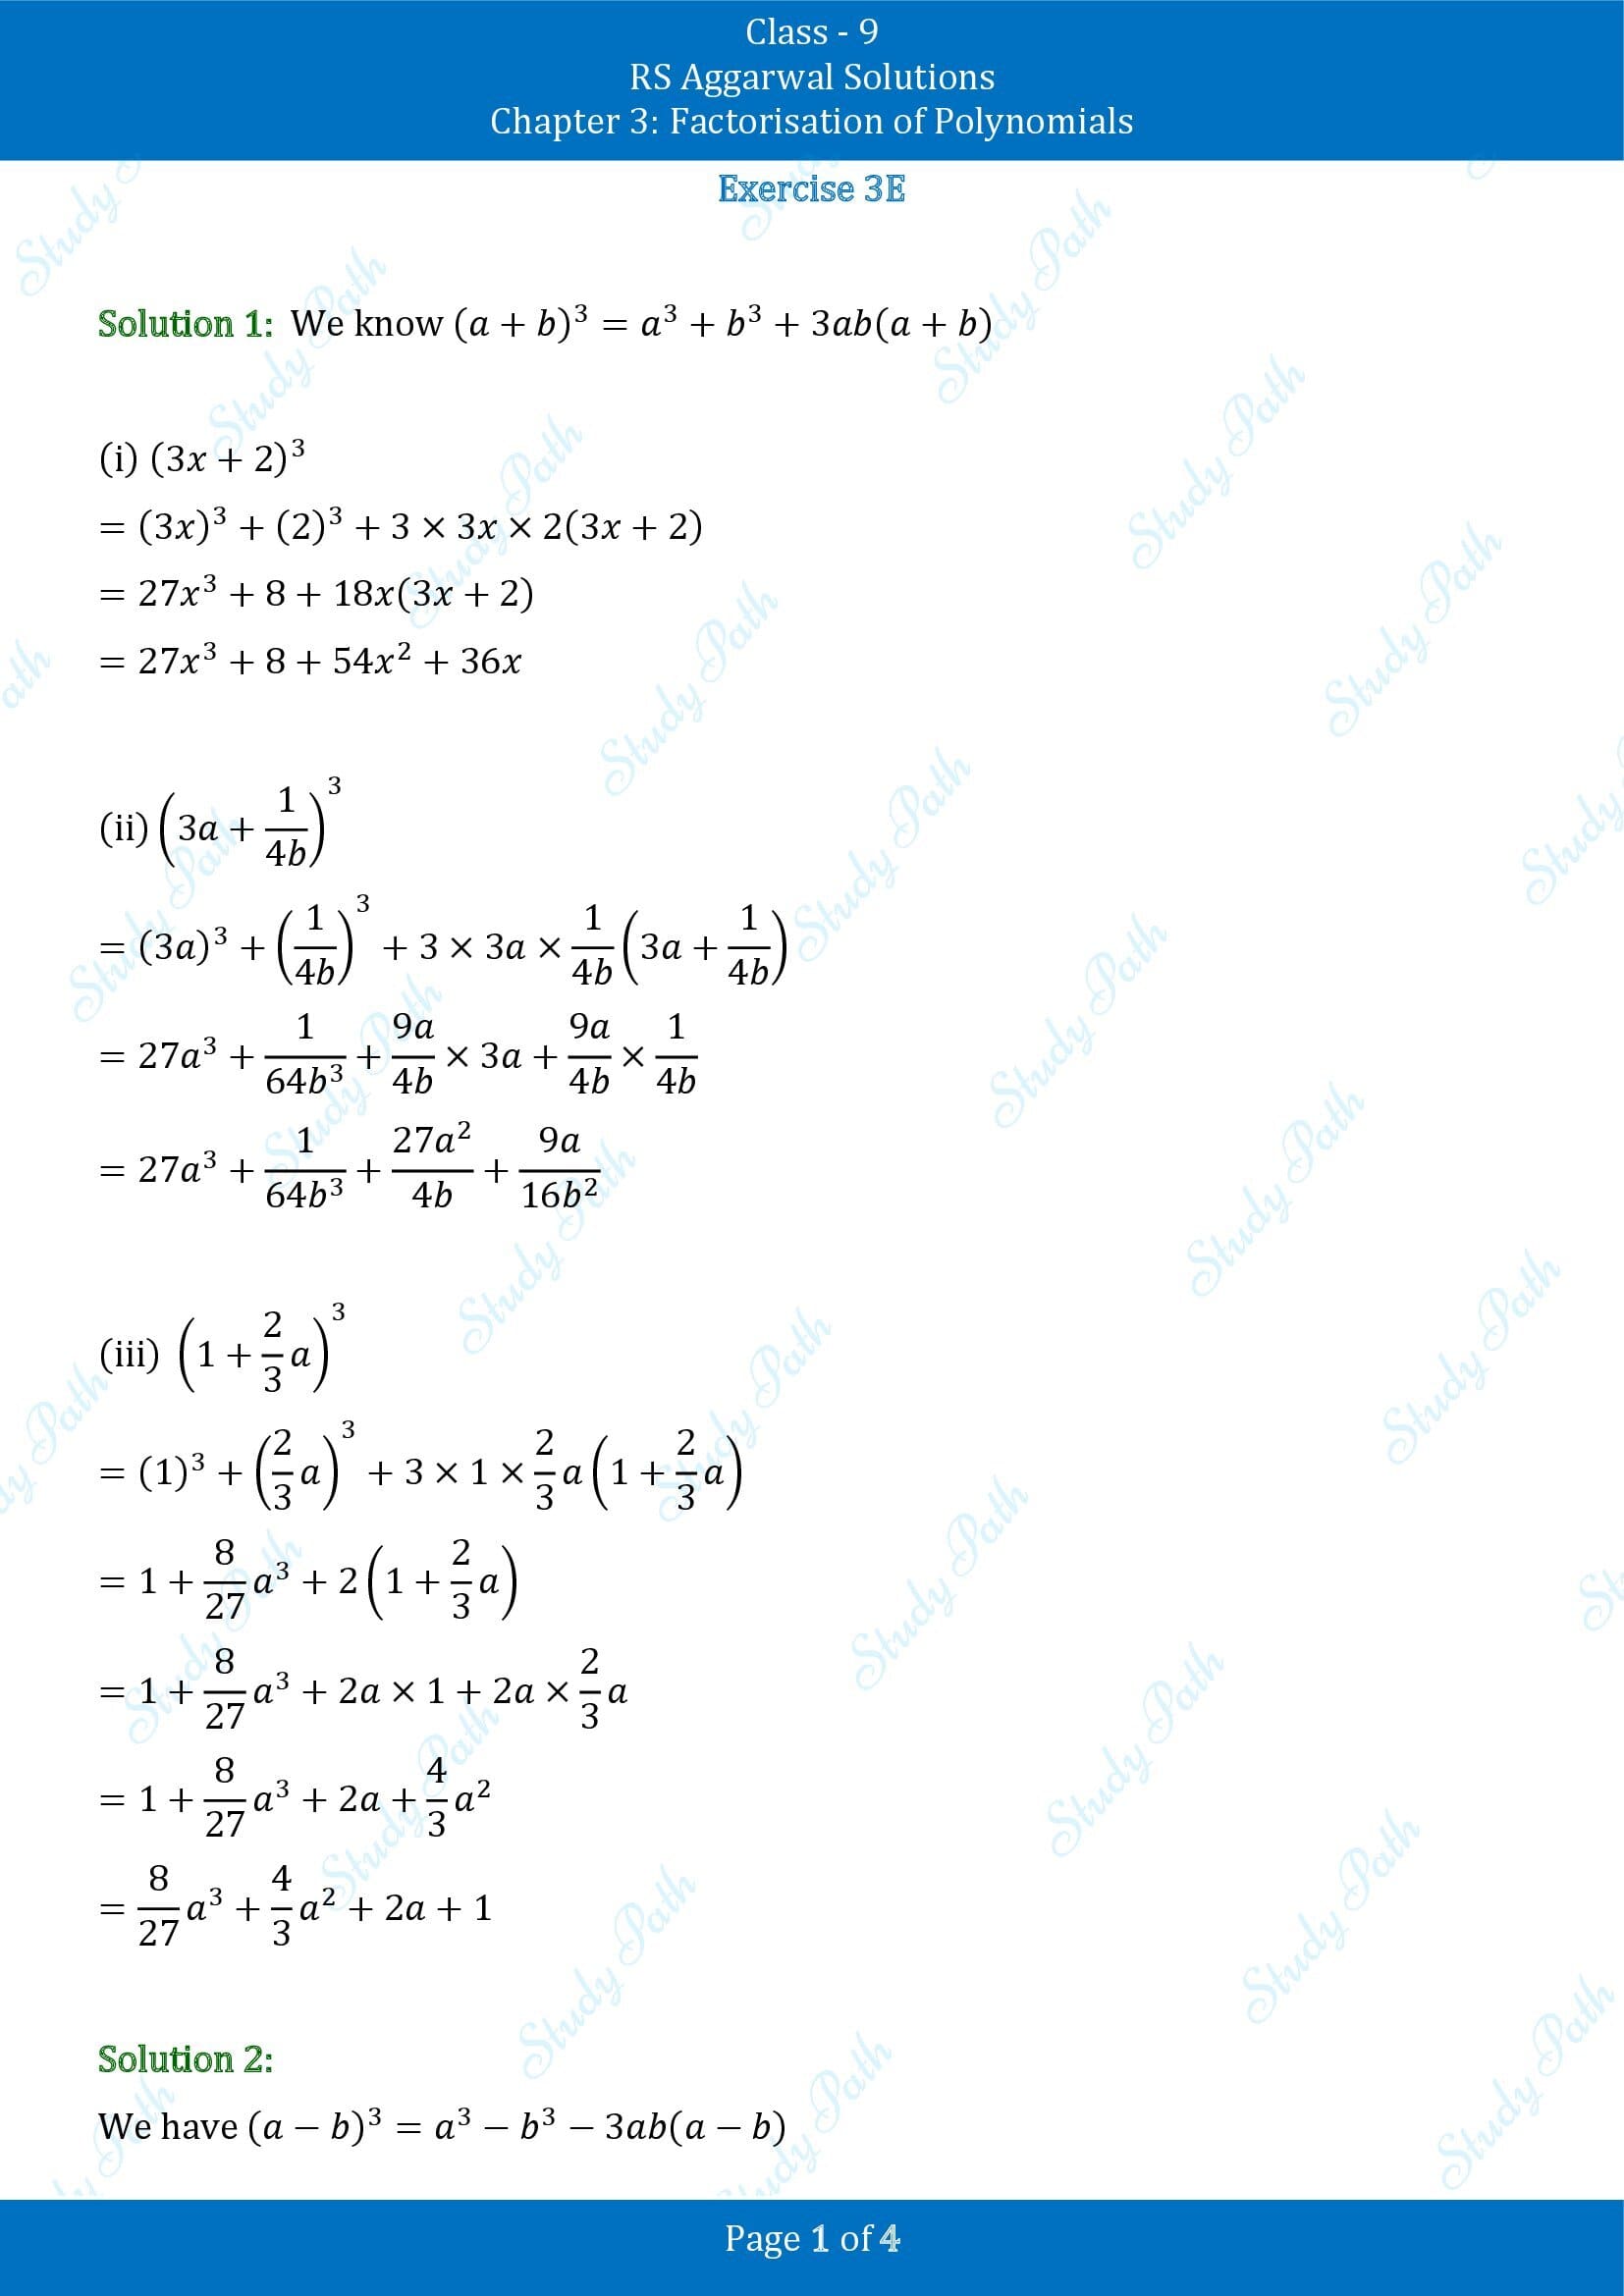 RS Aggarwal Solutions Class 9 Chapter 3 Factorisation of Polynomials Exercise 3E 00001